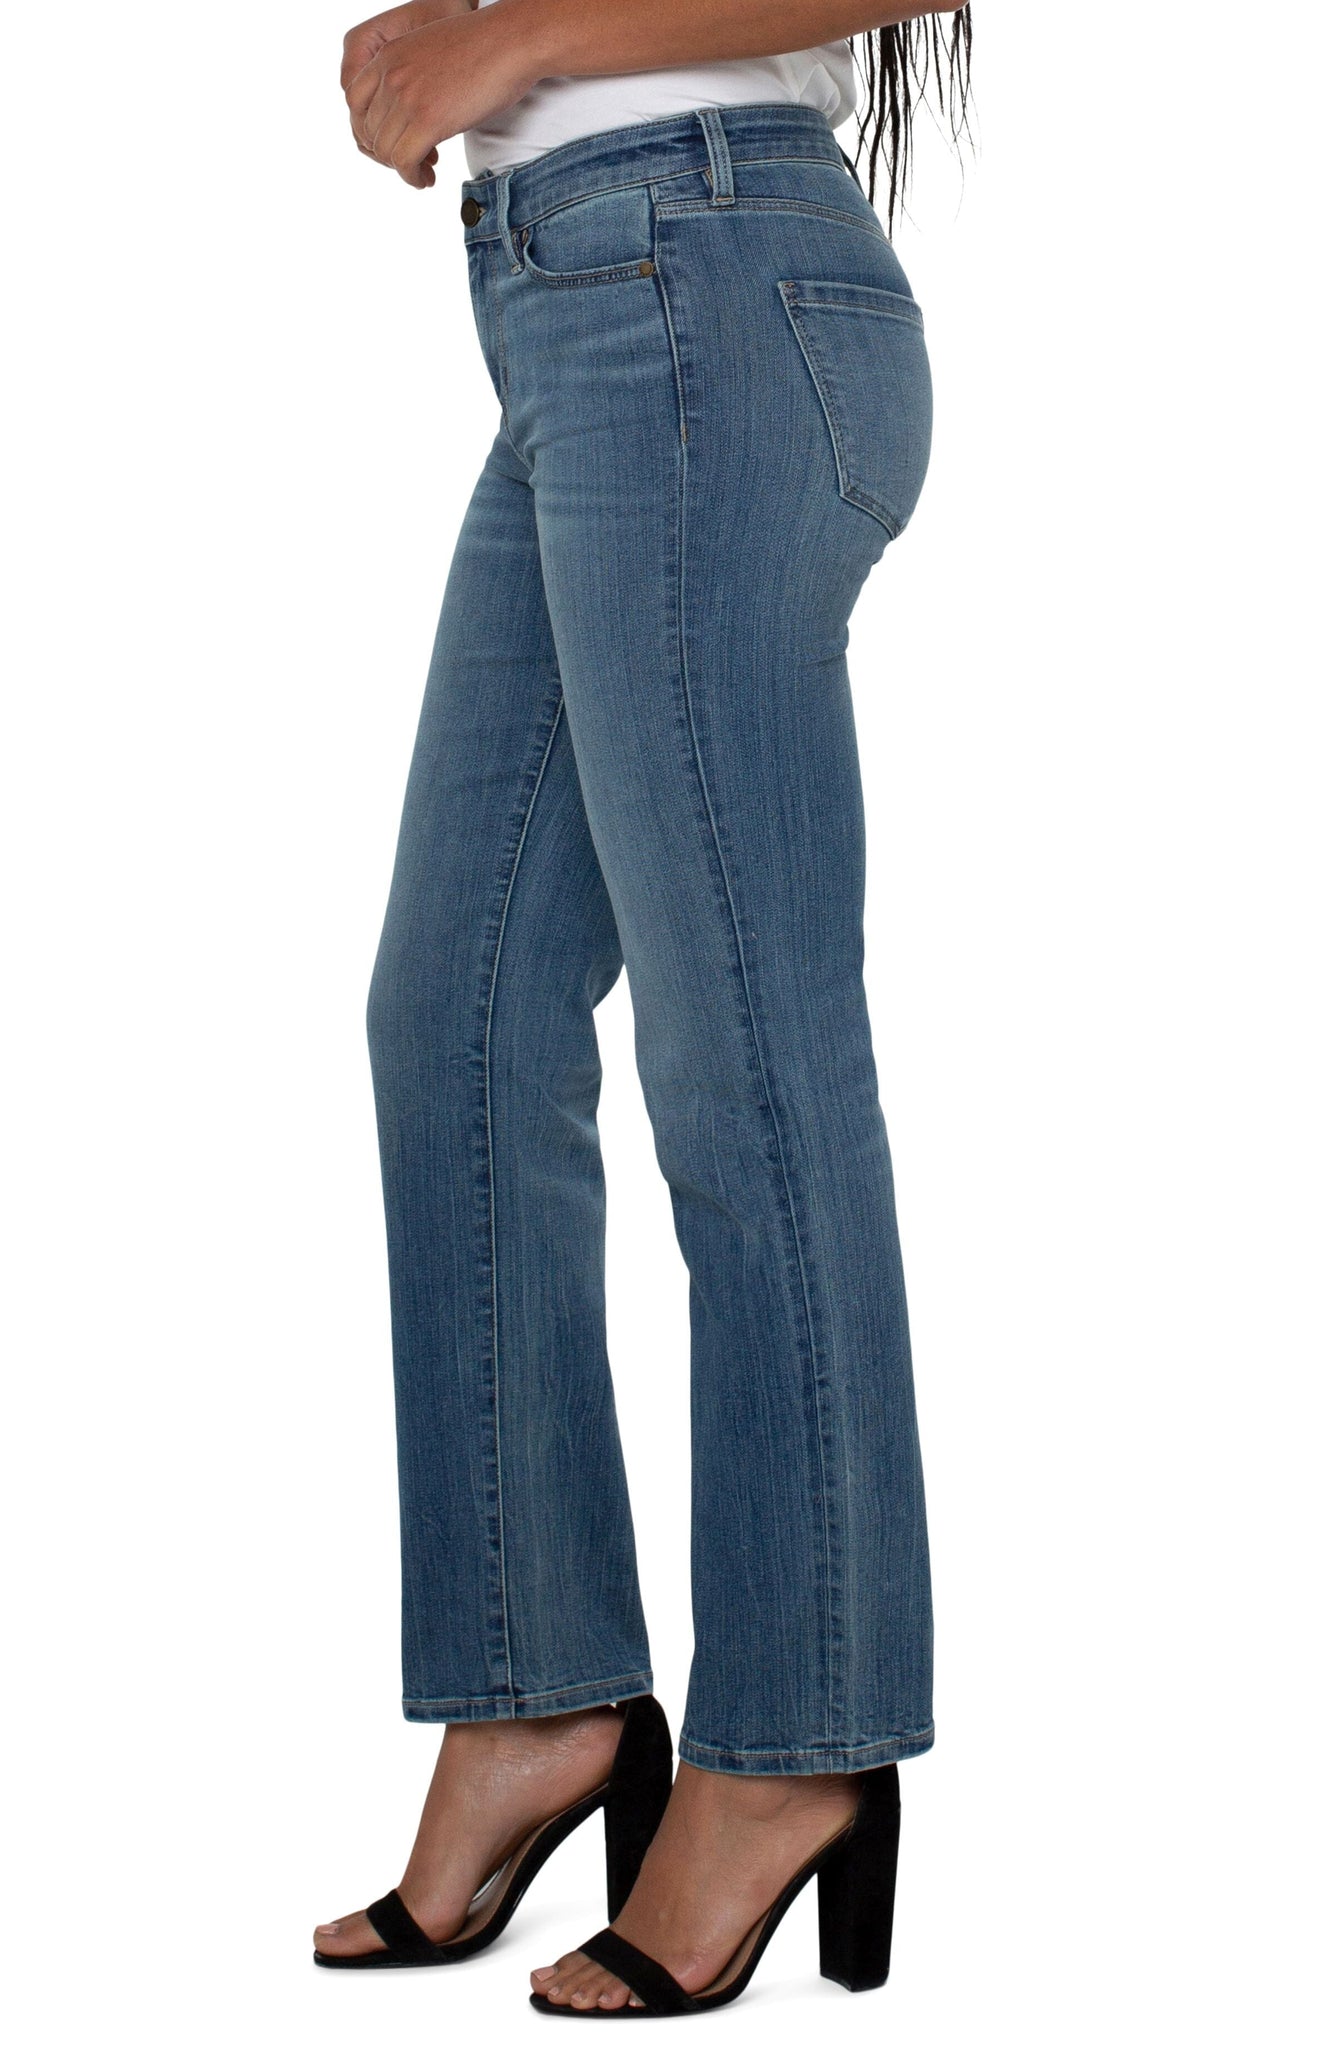 CLASSIC STRAIGHT HIGH RISE JEAN Jeans Liverpool 2 Bennet 